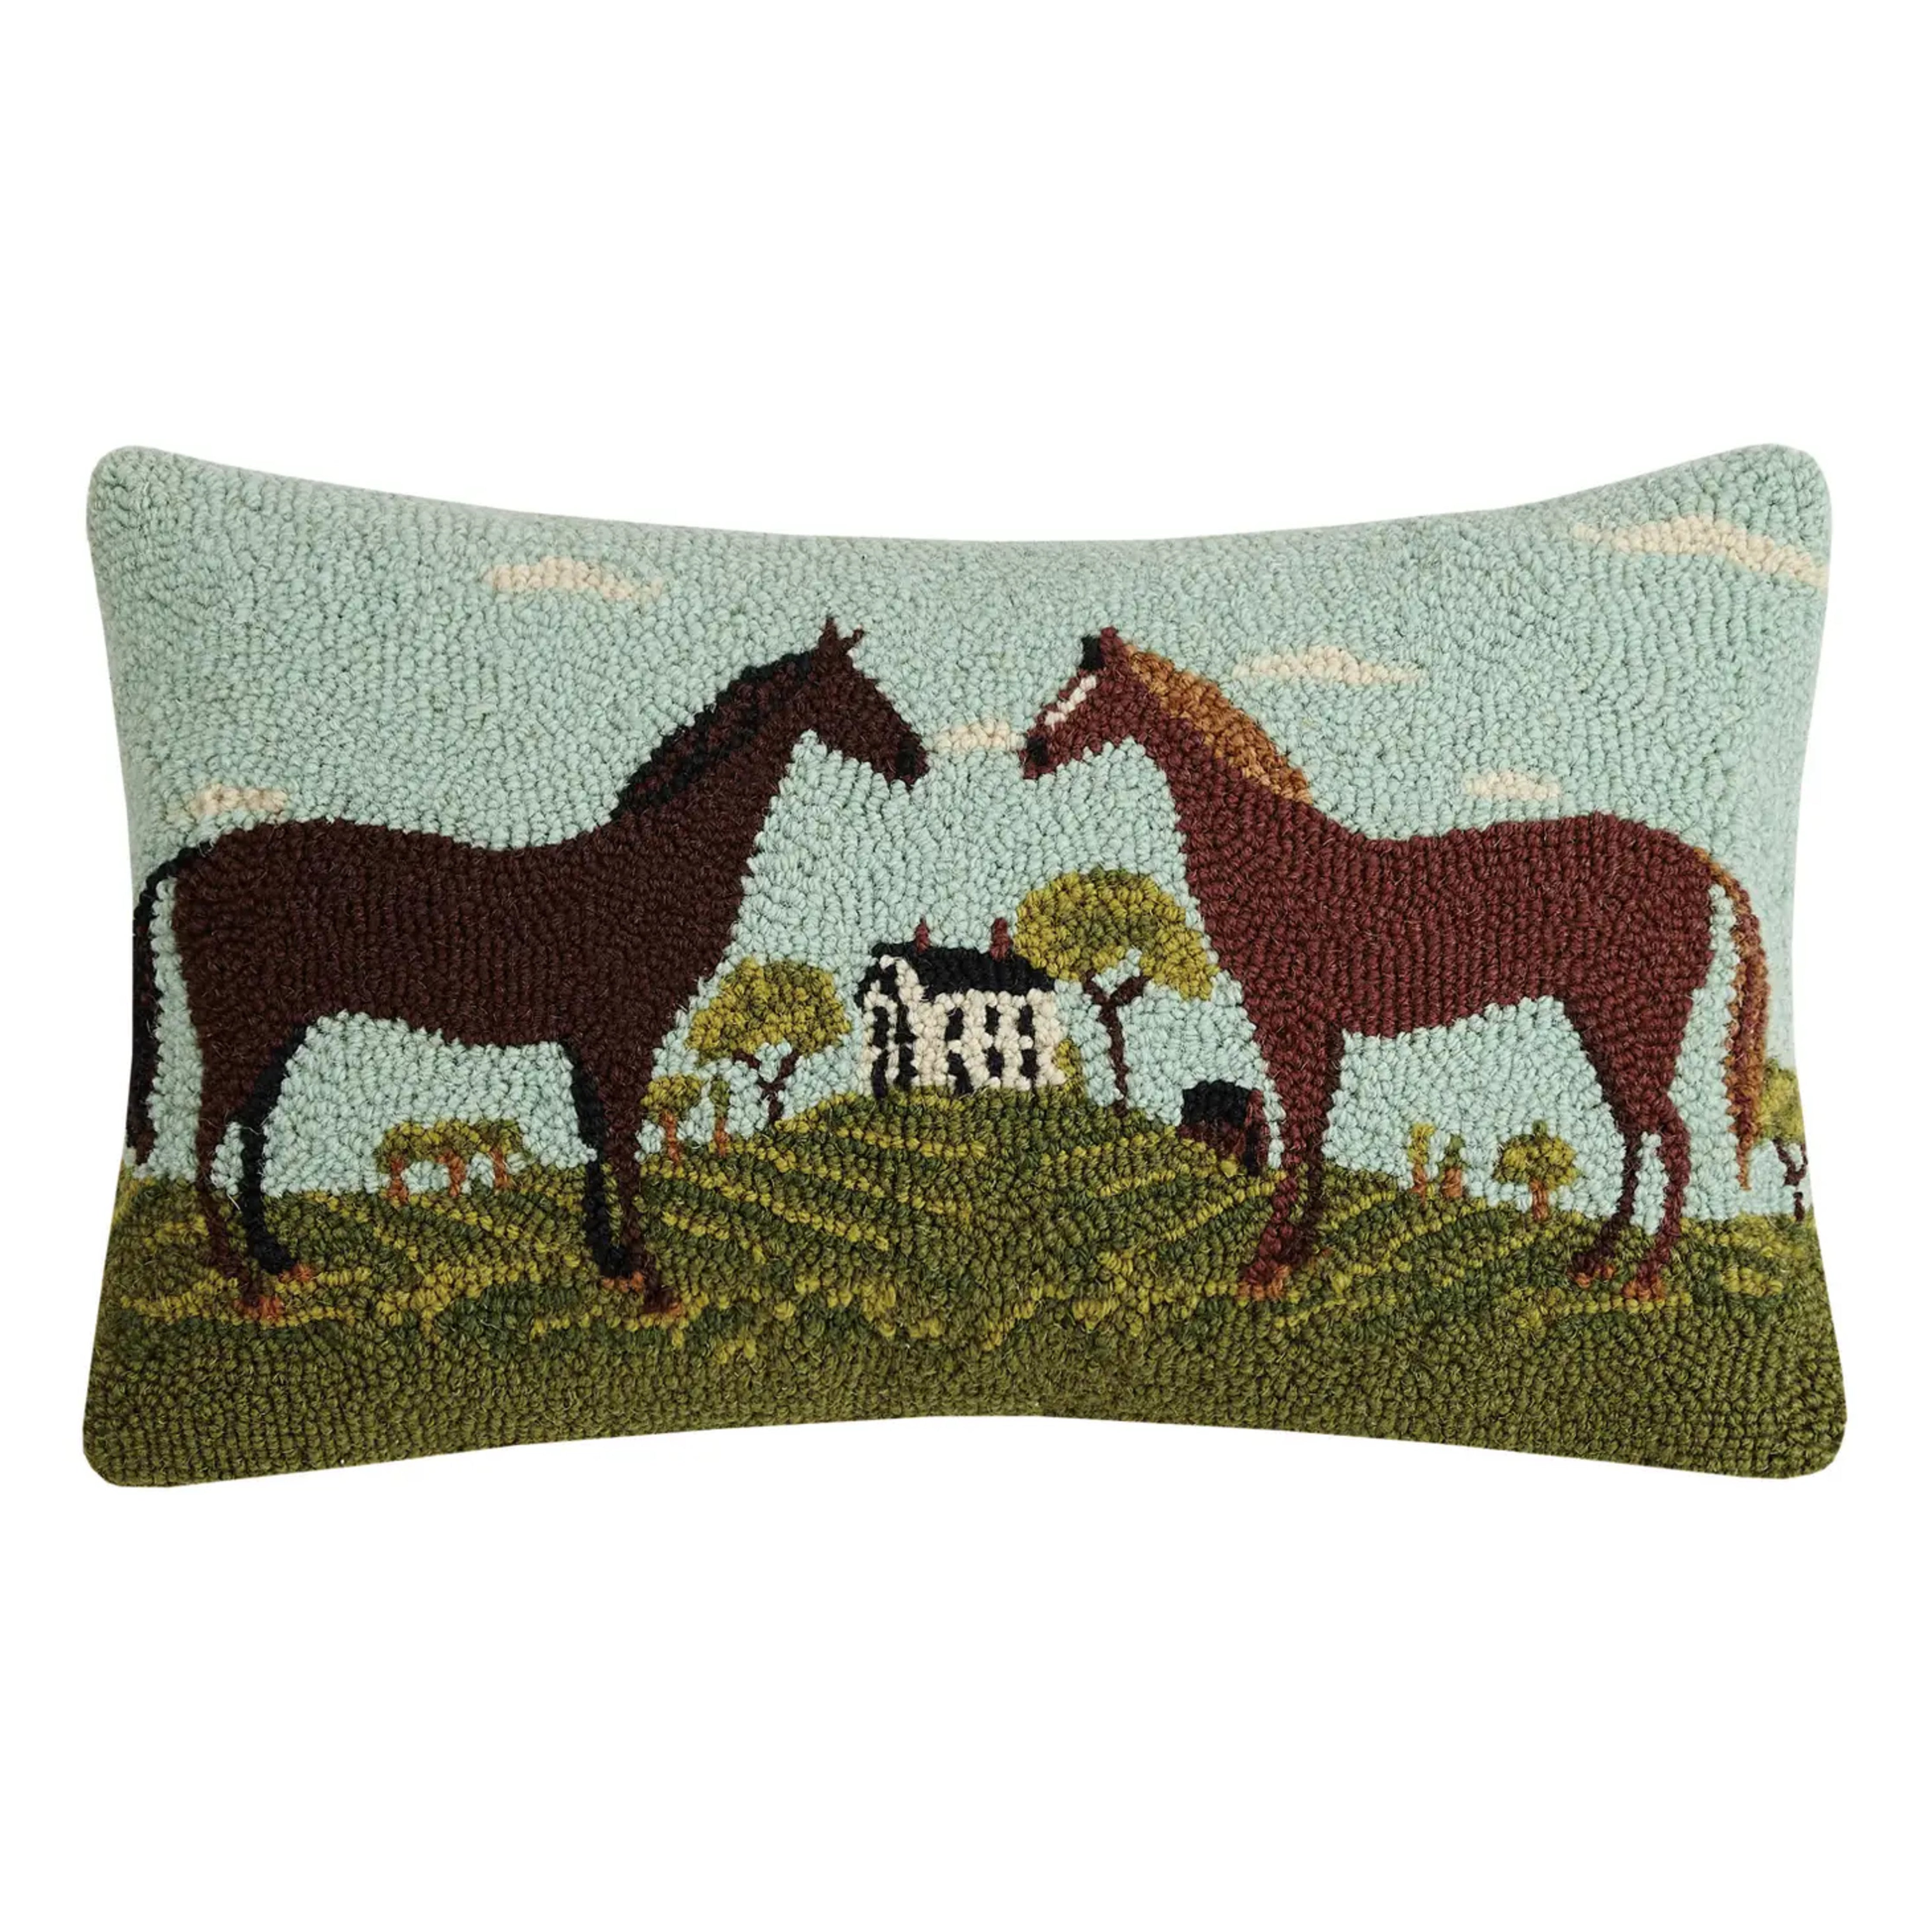 Horses in Field Hooked Pillow